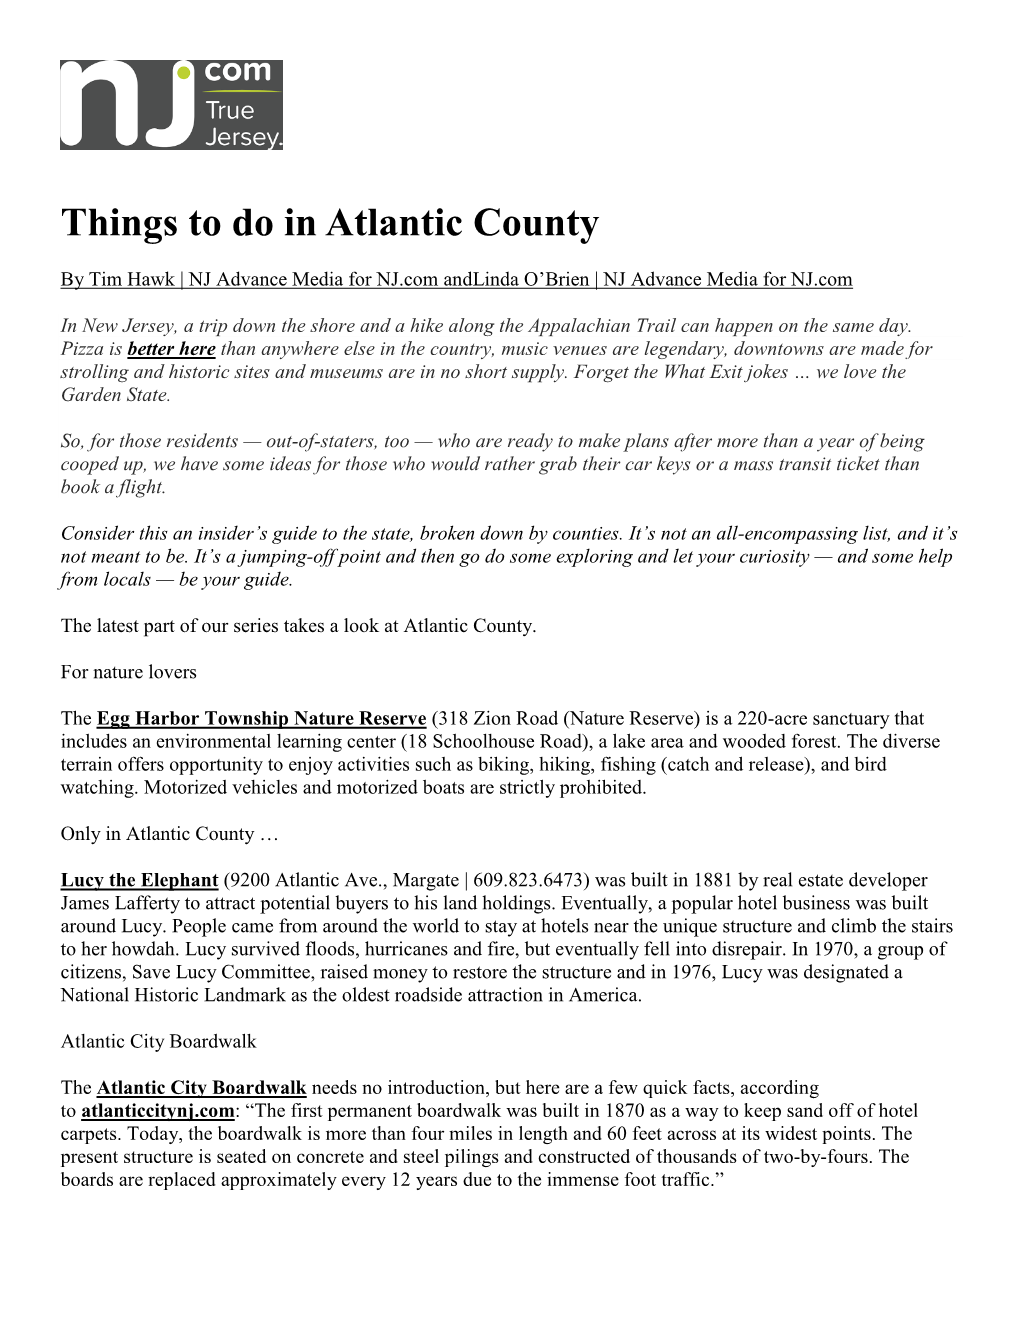 Things to Do in Atlantic County